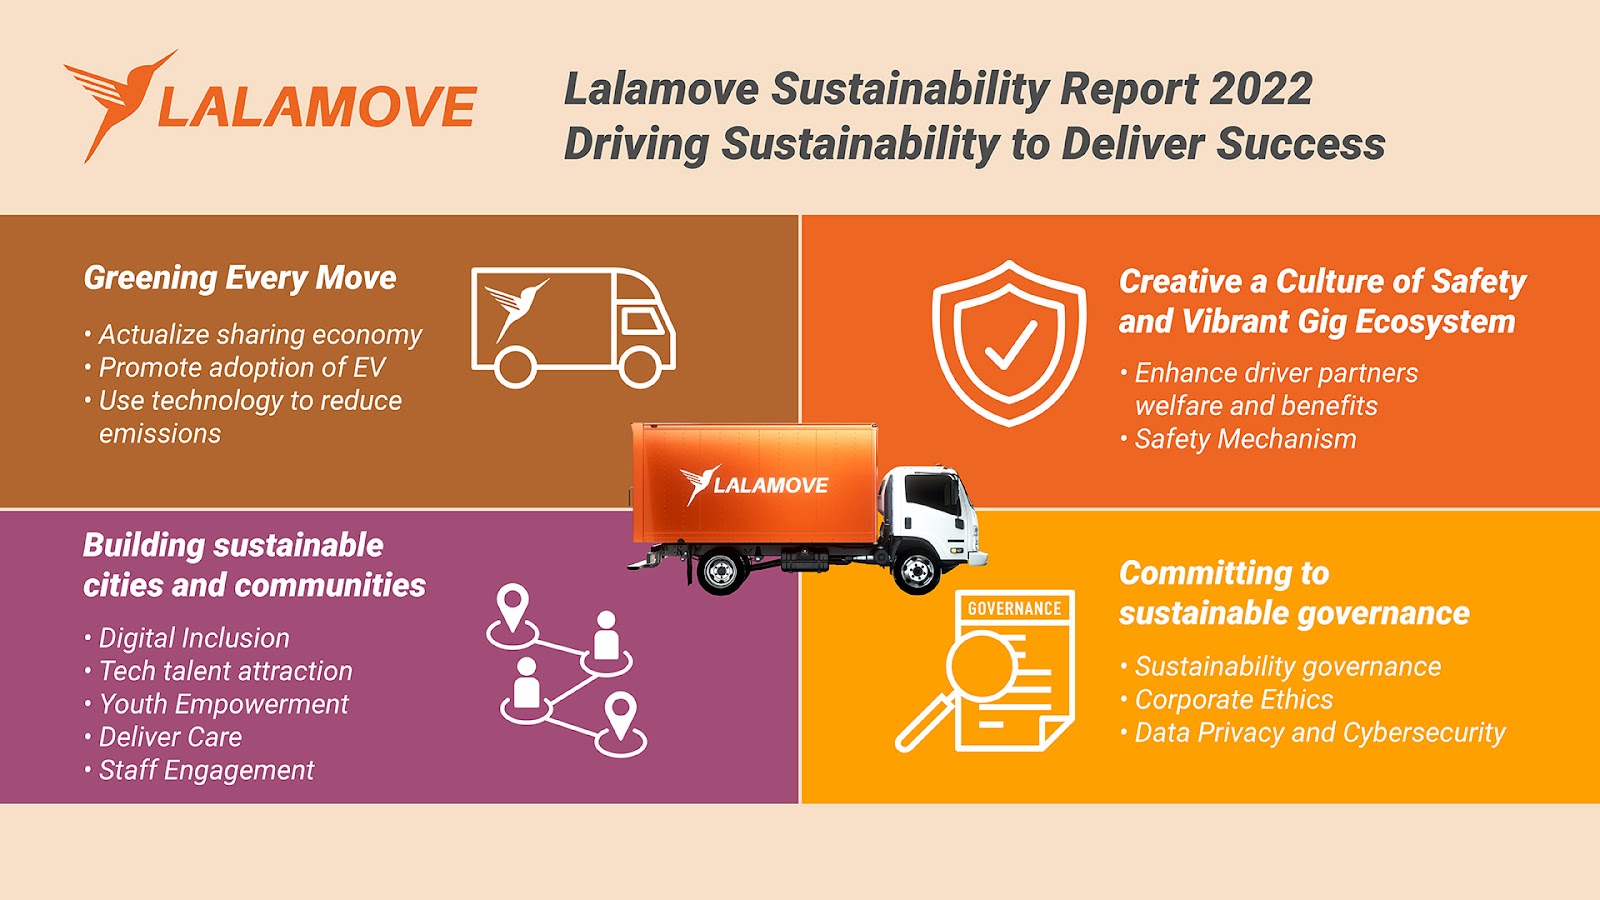 Image shows Lalamove's initiatives to Driving Sustainability to Deliver Success